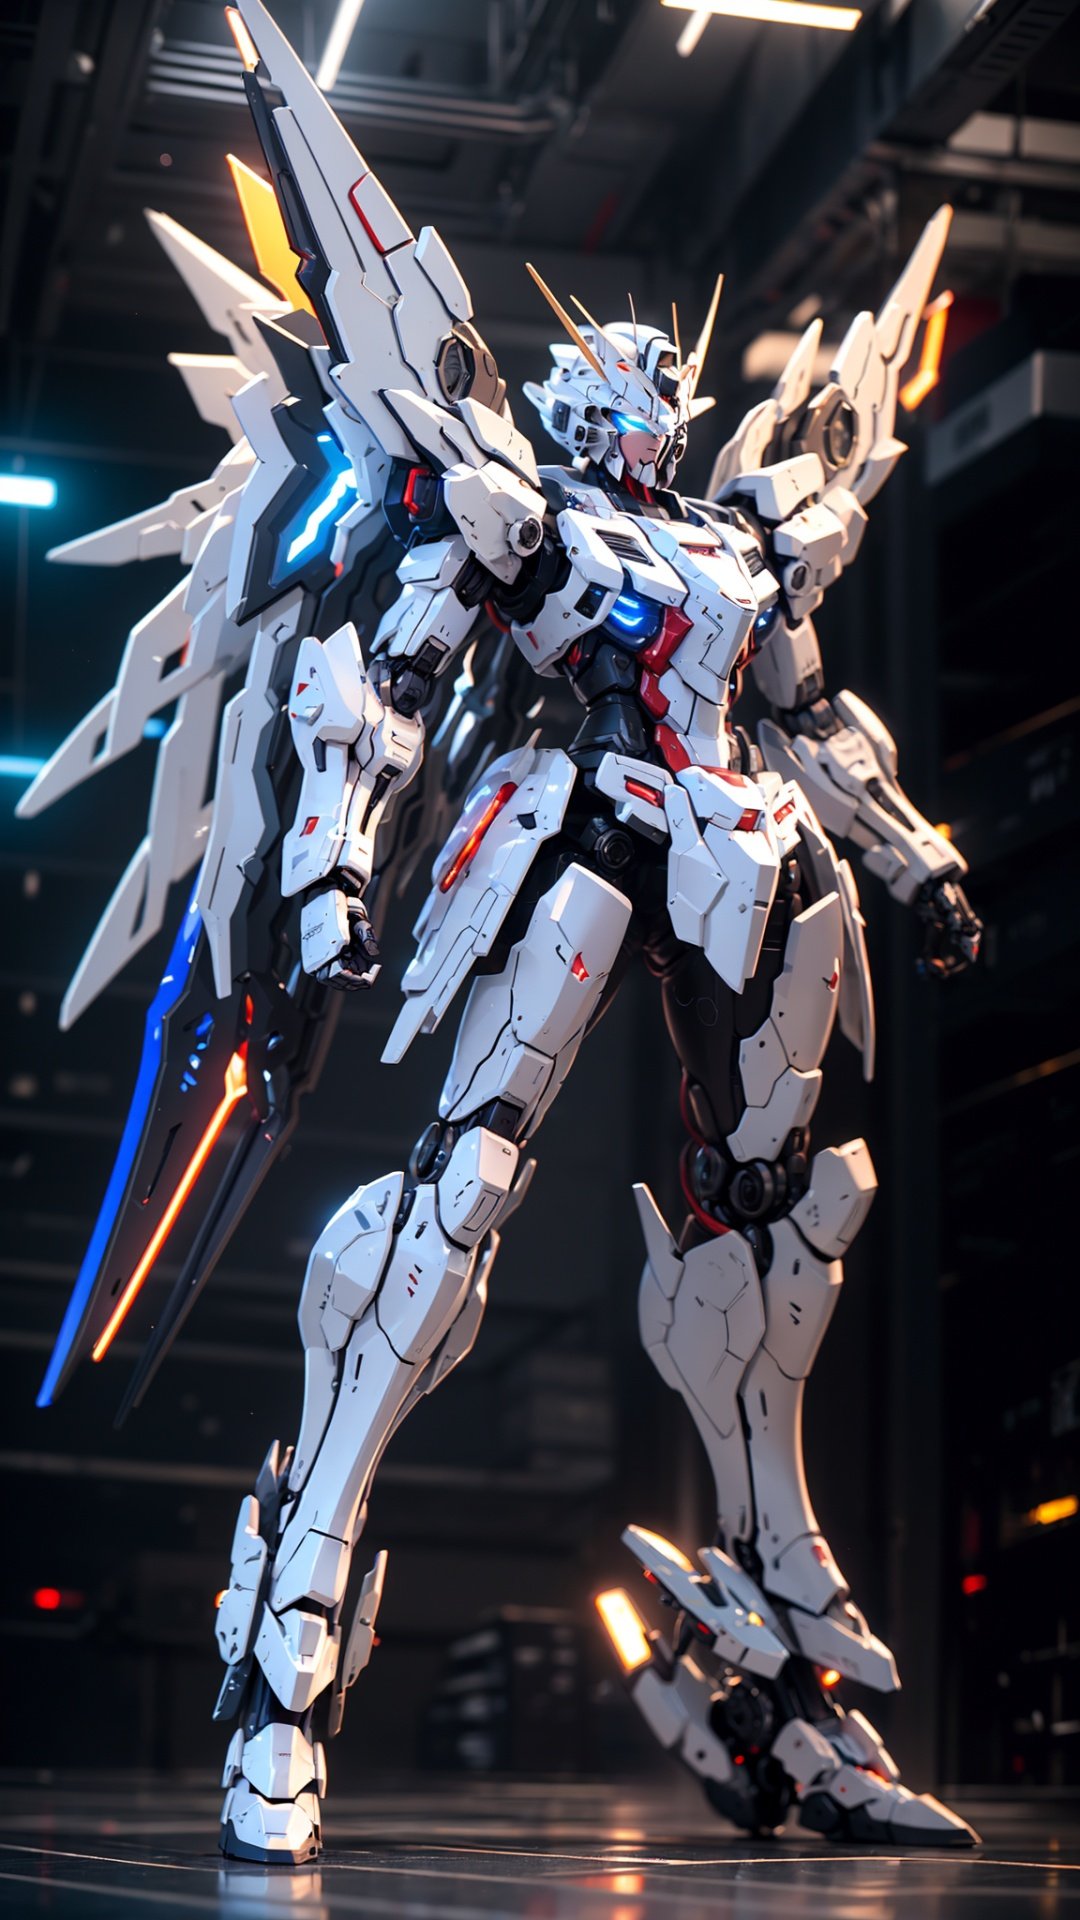 BJ_Gundam, wings, solo, blue_eyes, weapon, wings, gun, no_humans, glowing, robot, mecha, clenched_hands, floating, science_fiction, mechanical_wings, v-fin,cinematic lighting,strong contrast,high level of detail,Best quality,masterpiece,White background,. Extremely high-resolution details,photographic,realism pushed to extreme,fine texture,incredibly lifelike,<lora:Gundam_Mecha_v5.2:0.7>,